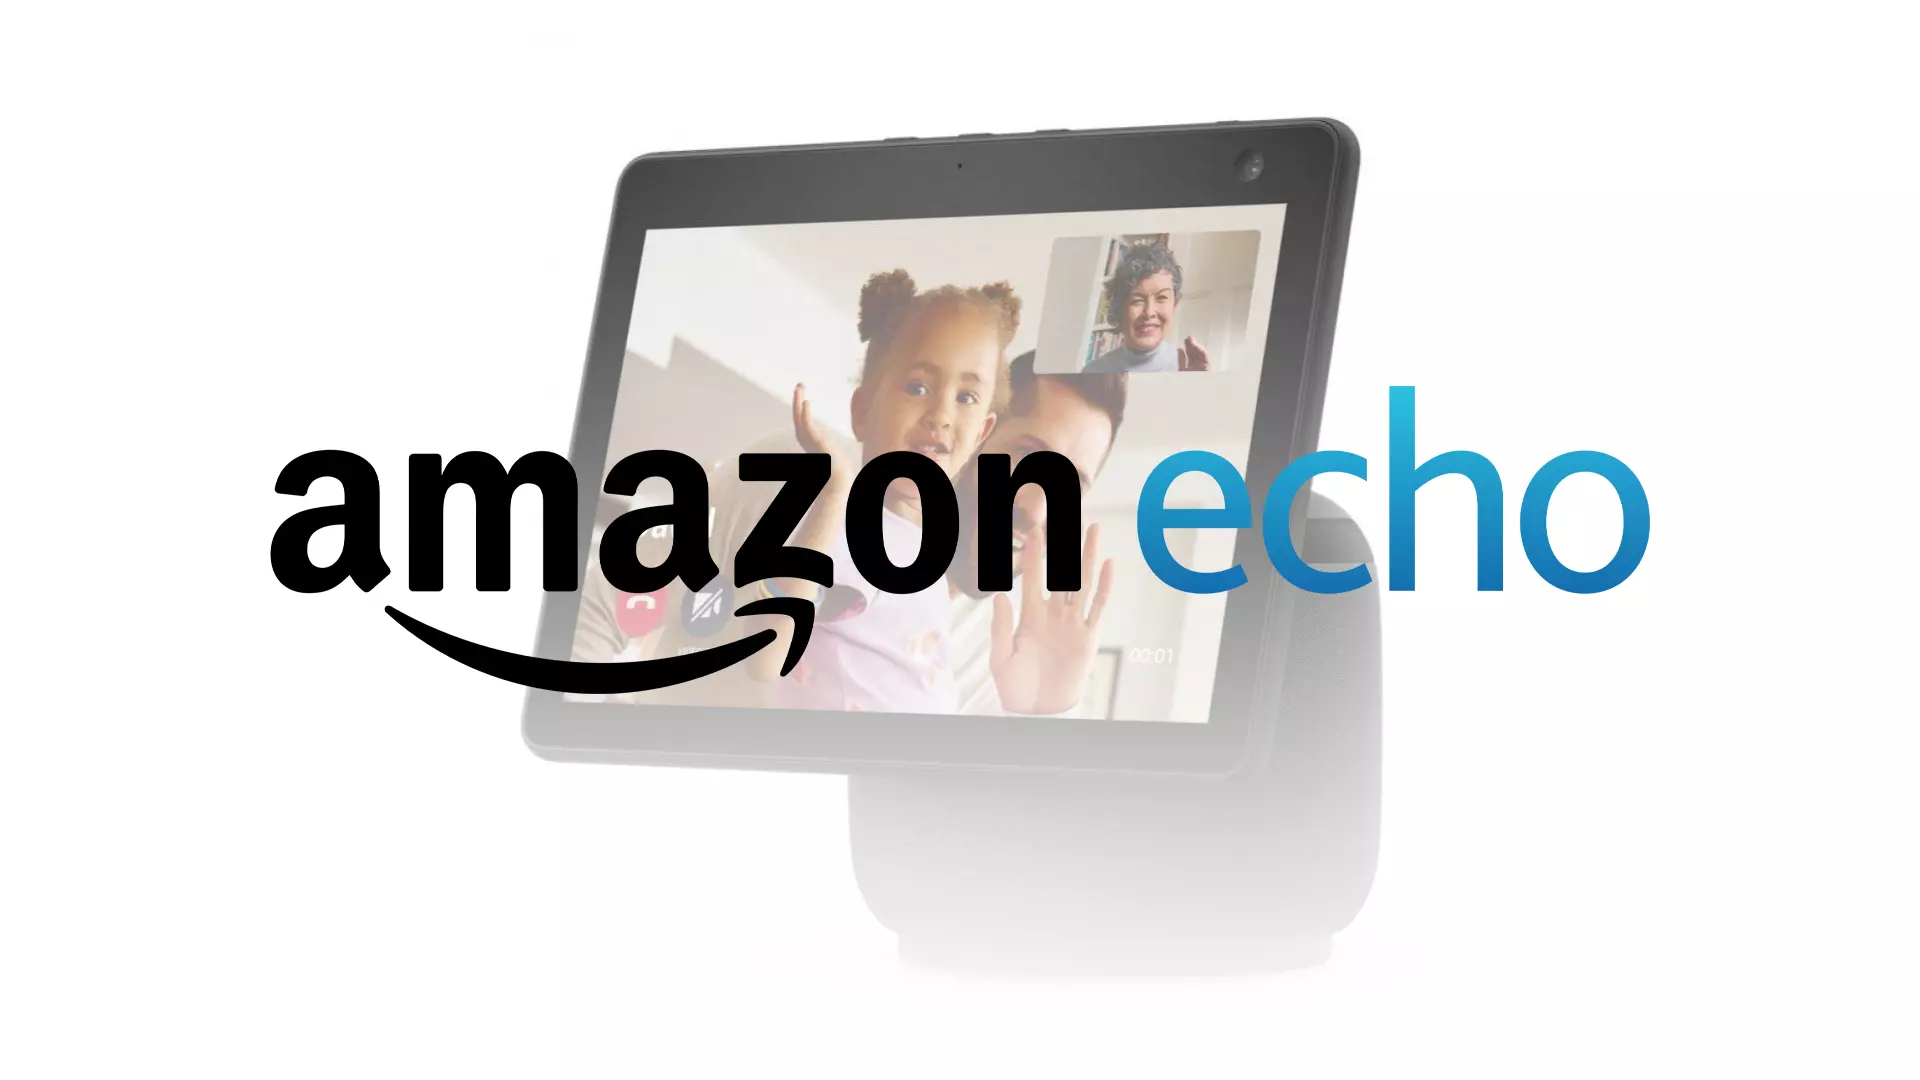 Amazon's Echo Show 10 is available for $200 right now